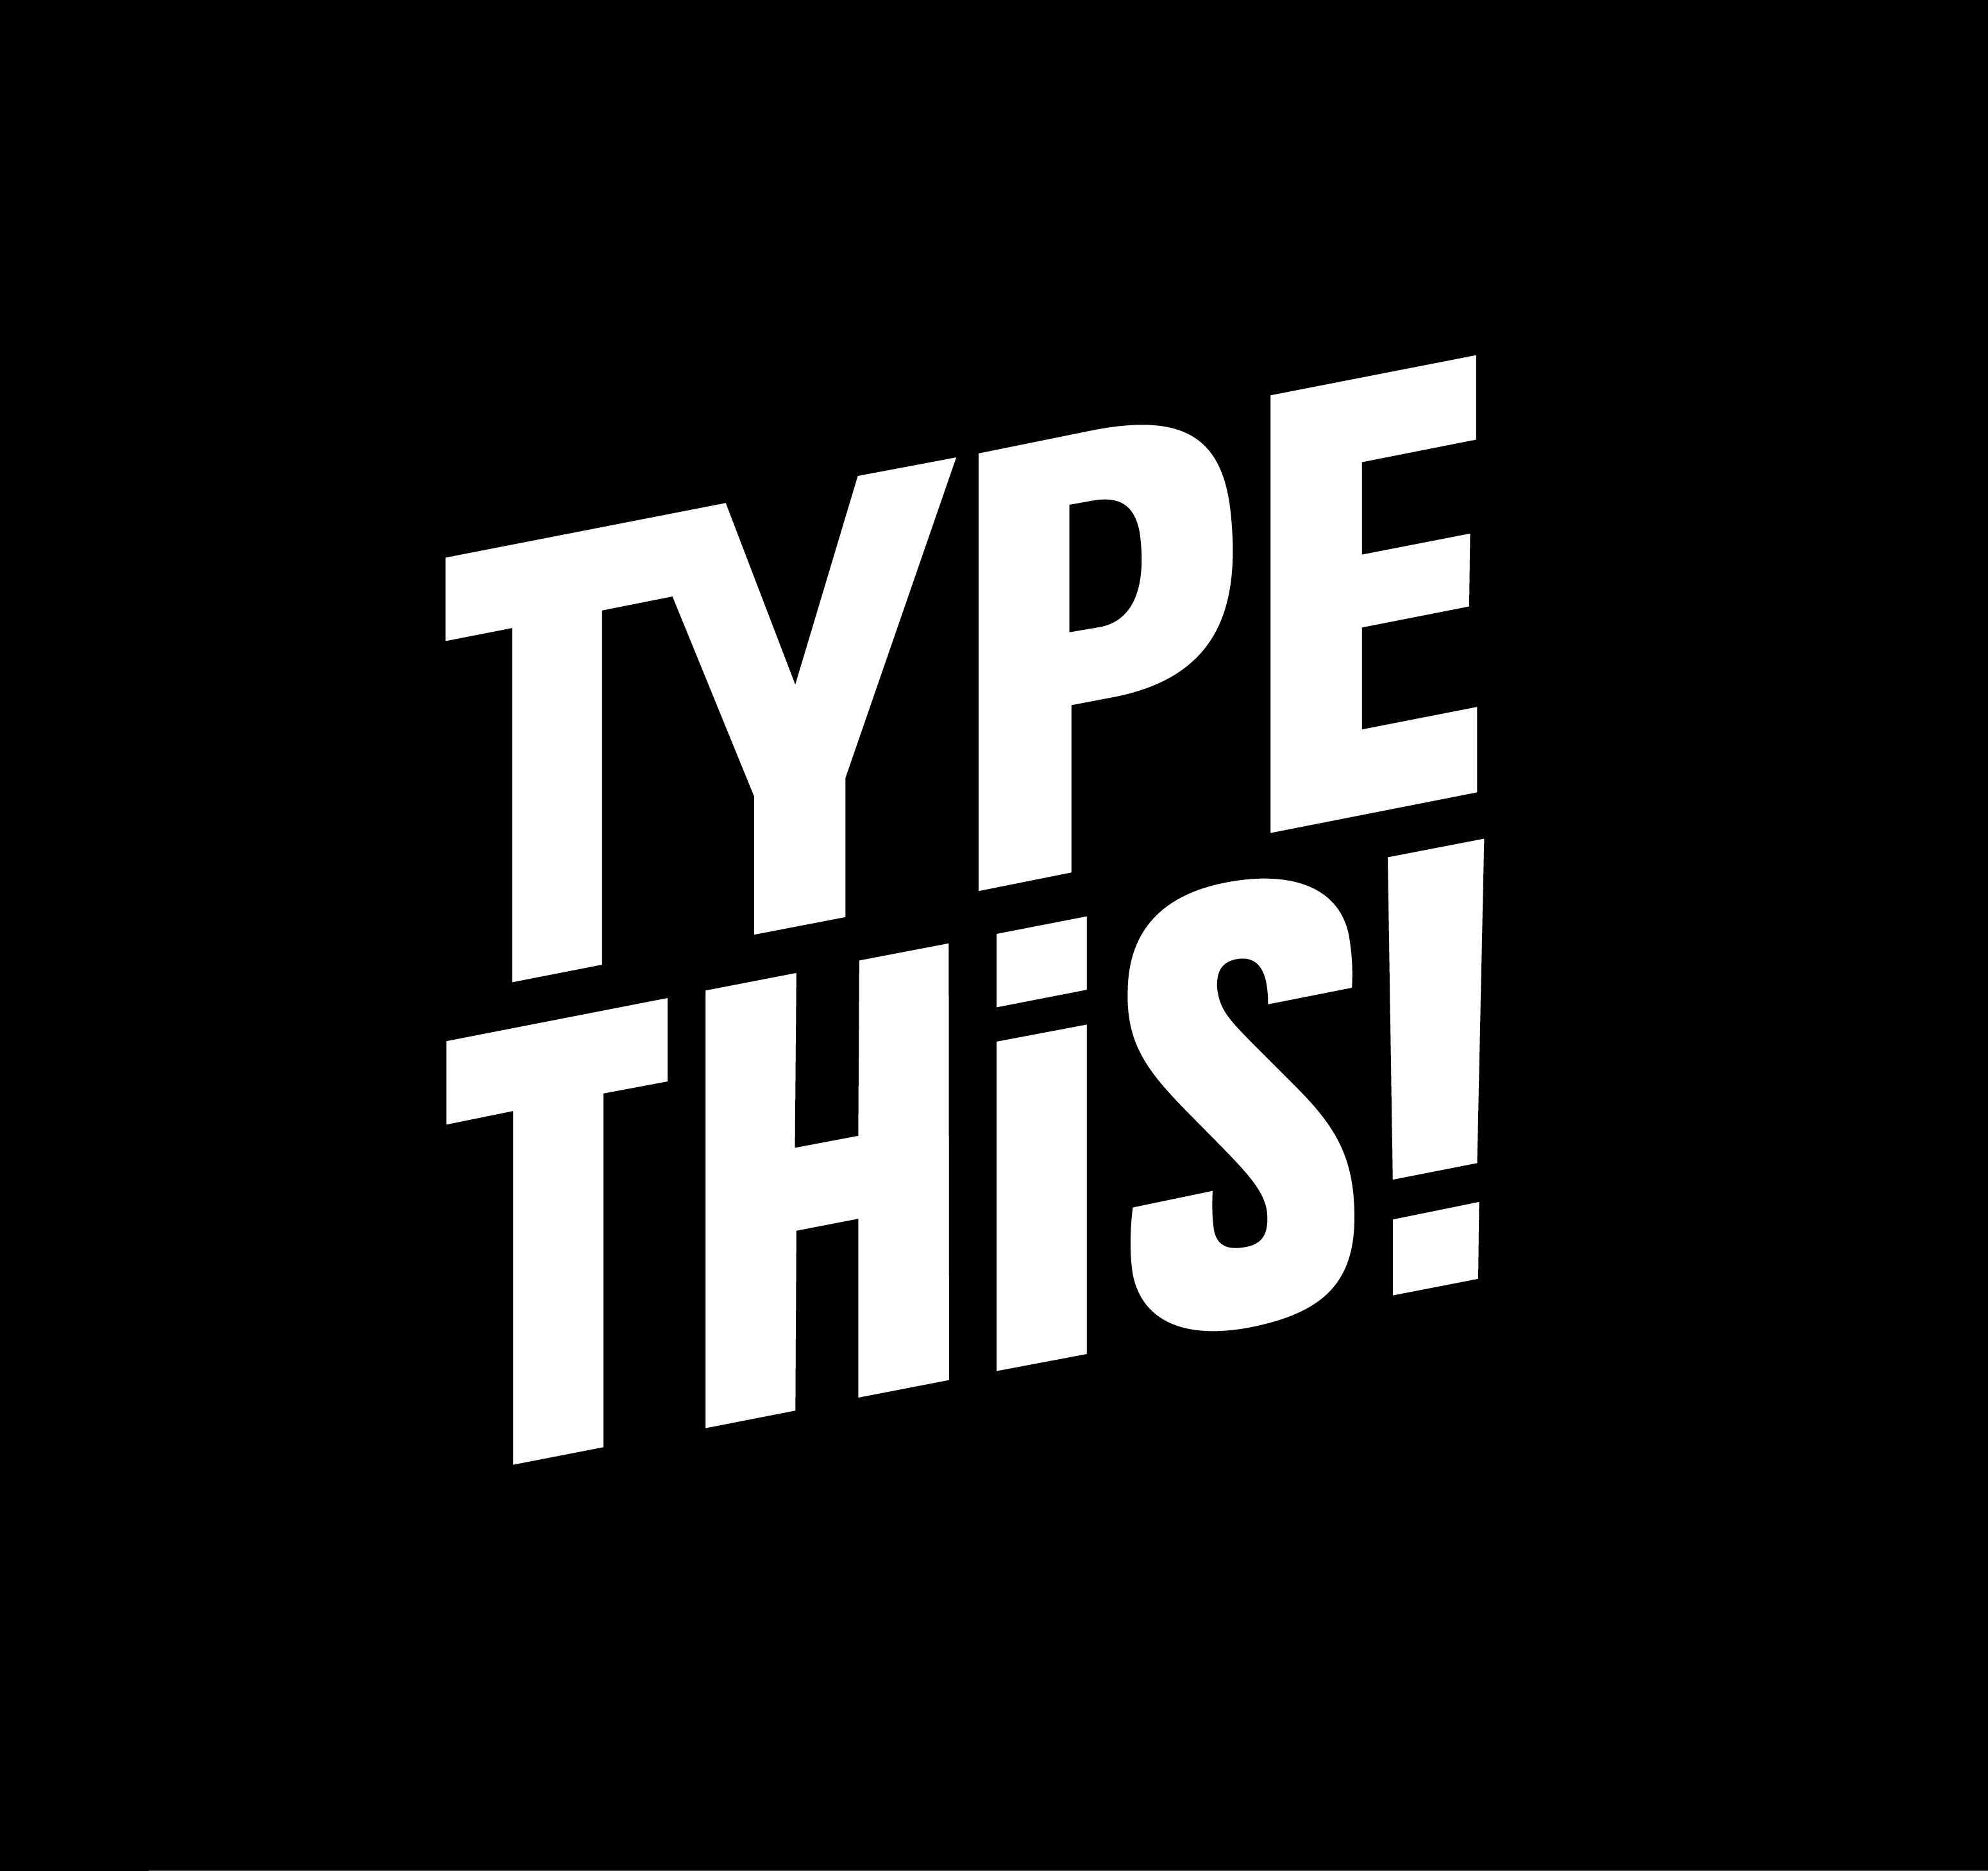 TypeThis!Studio: A New Type Foundry That Empowers Their Customers